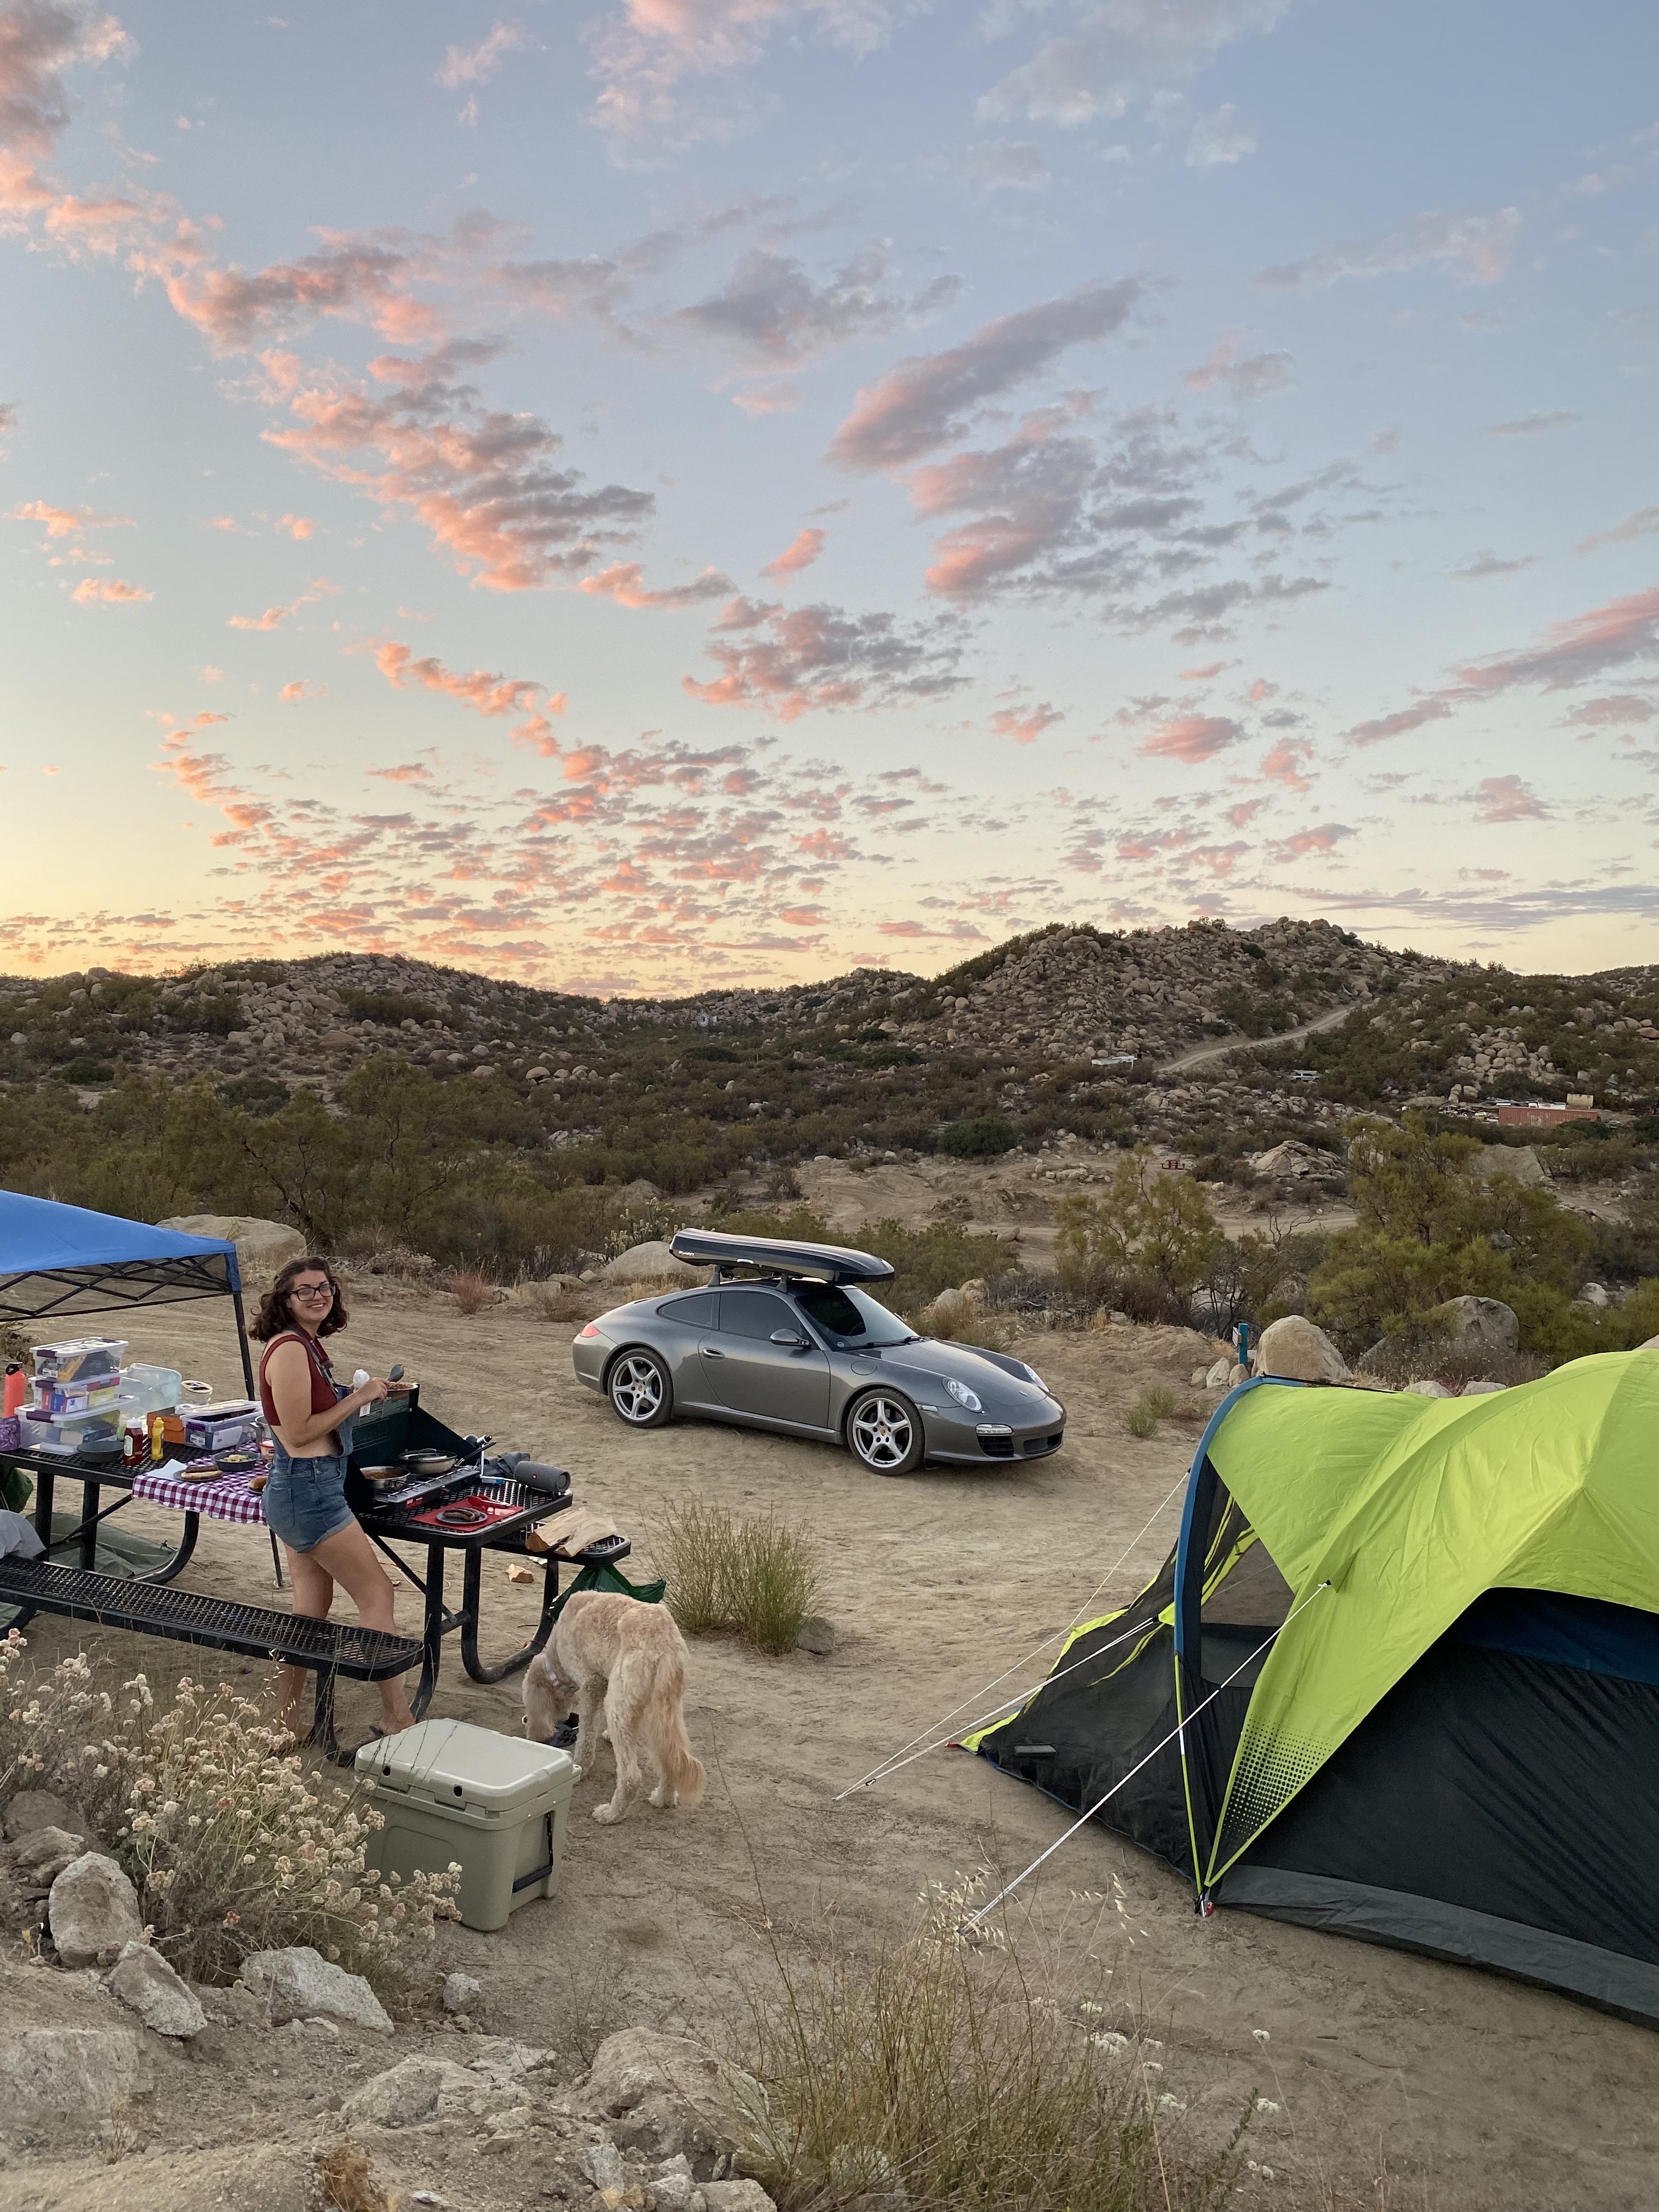 Woman and dog outdoors with tent, Porsche 911 in background